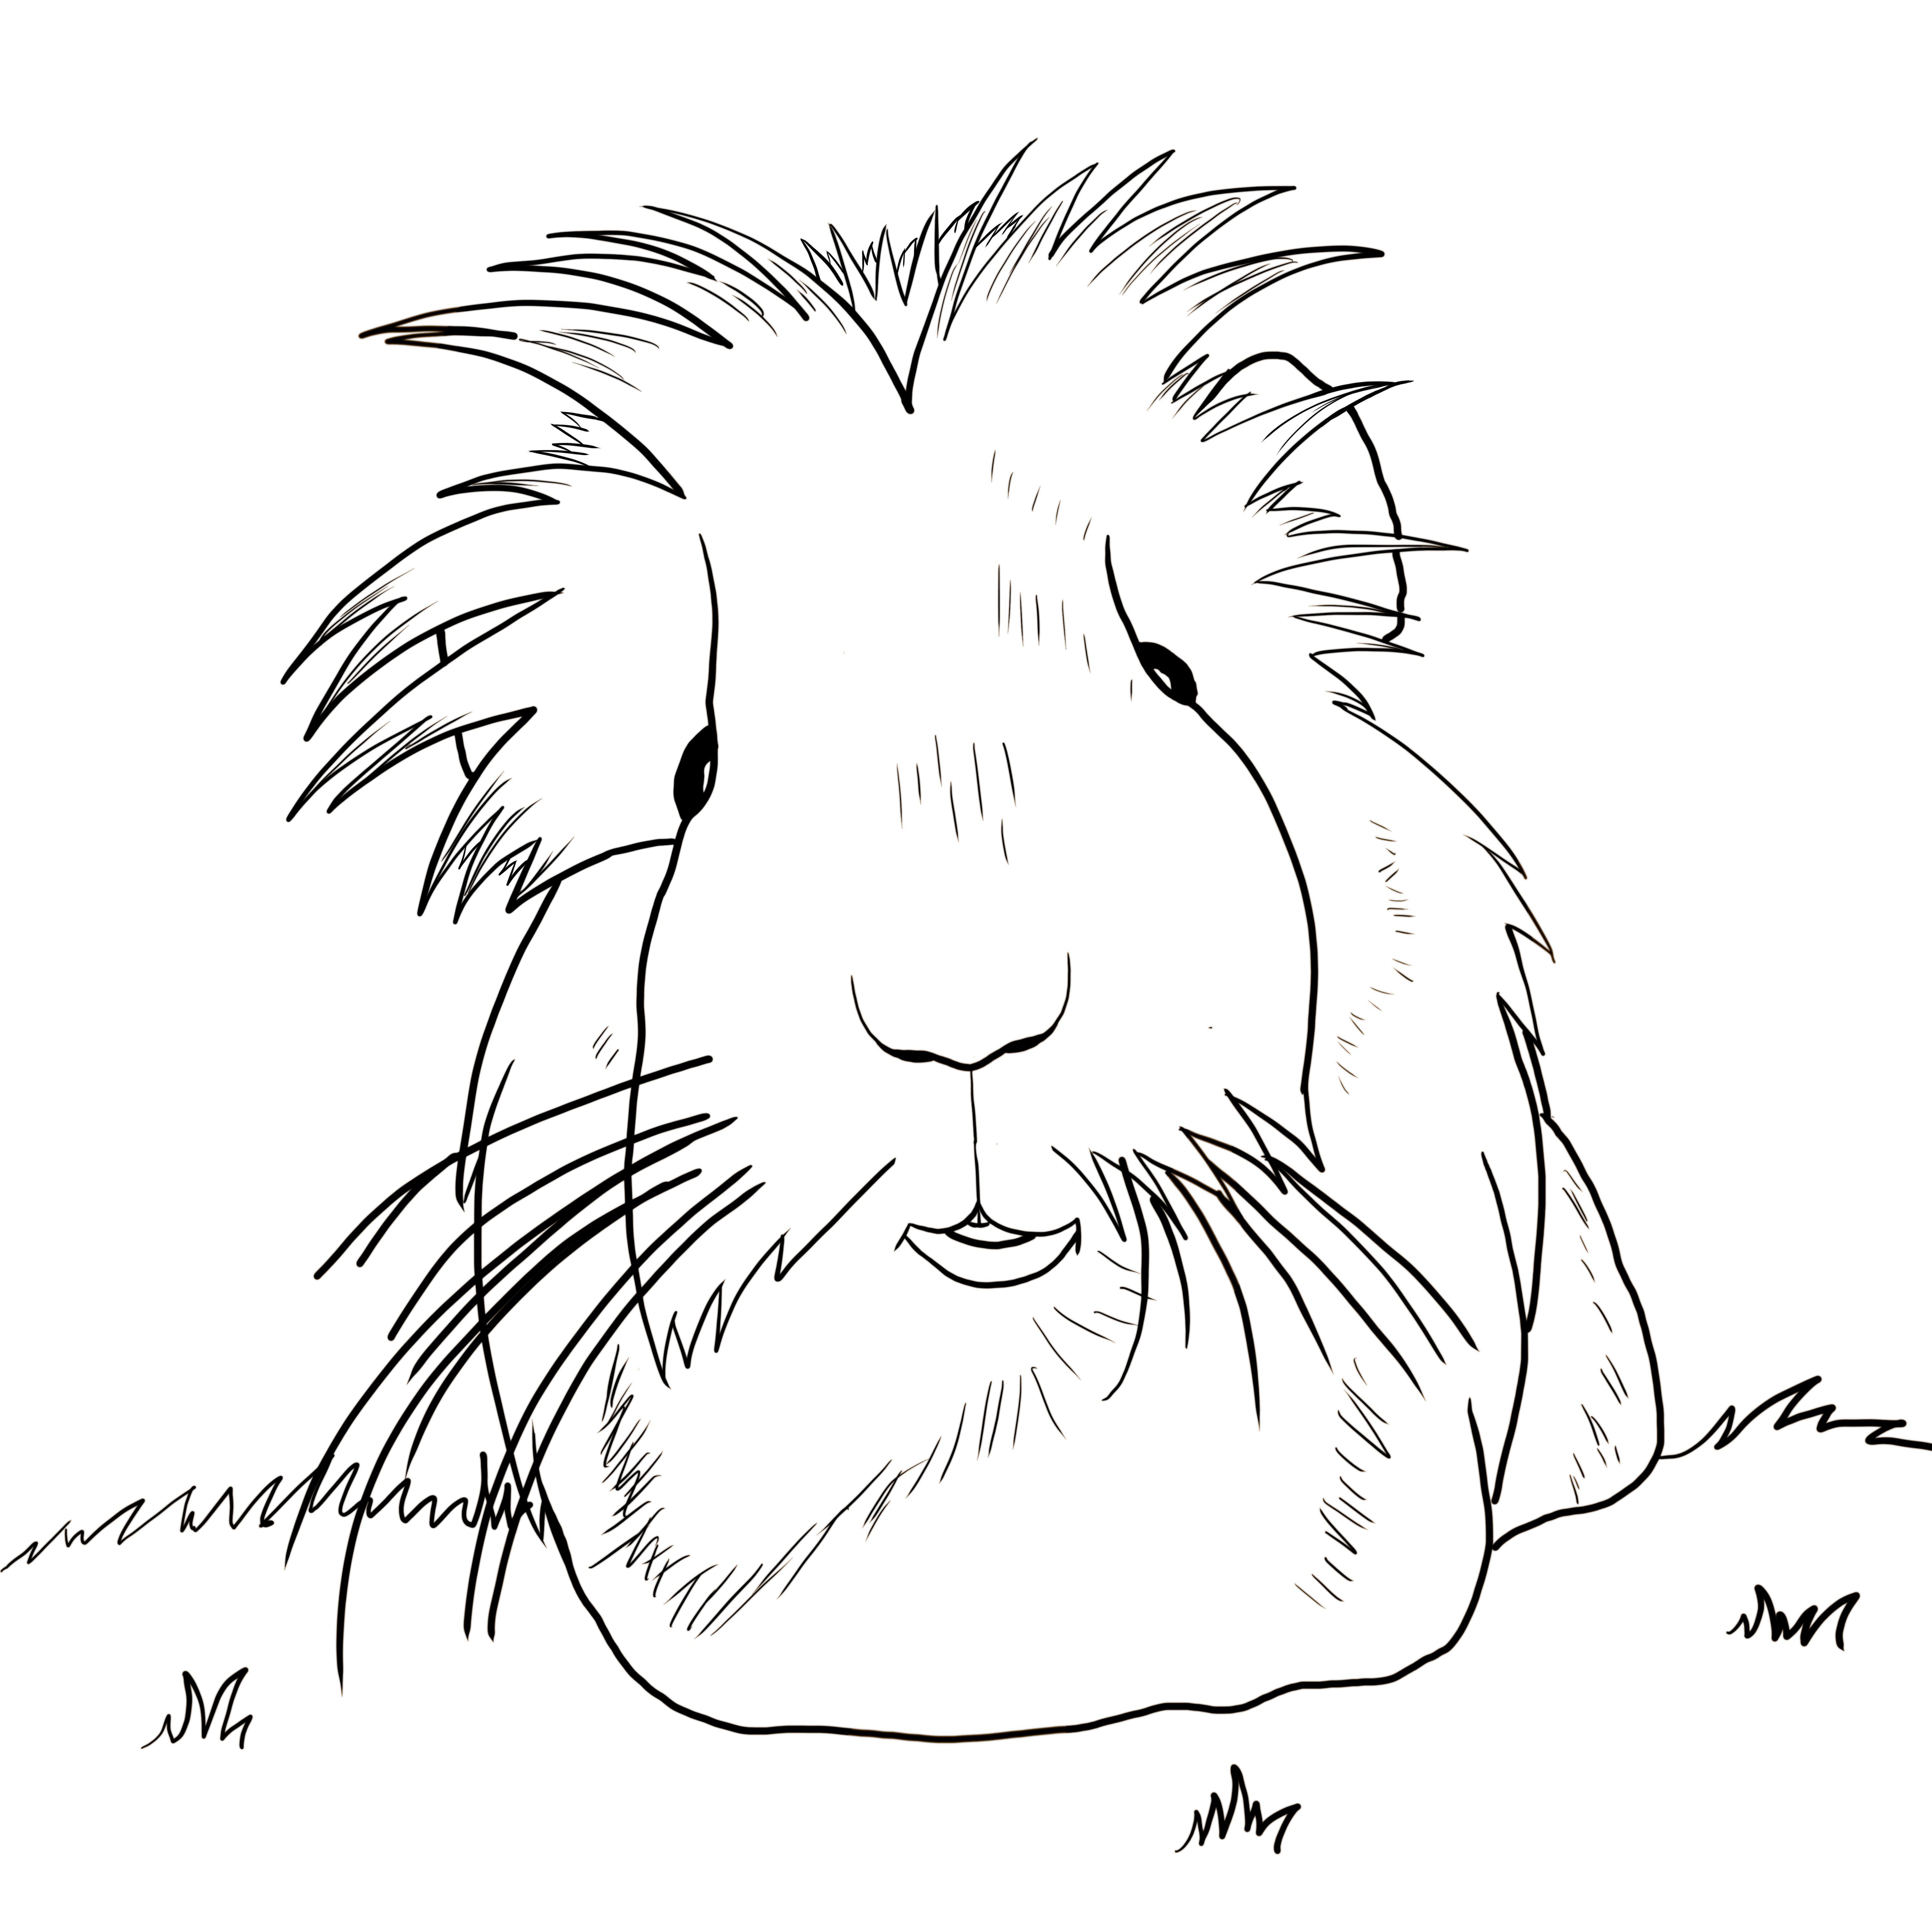 Im trying to make a guinea pig coloring book for my wife details and a request below rguineapigs